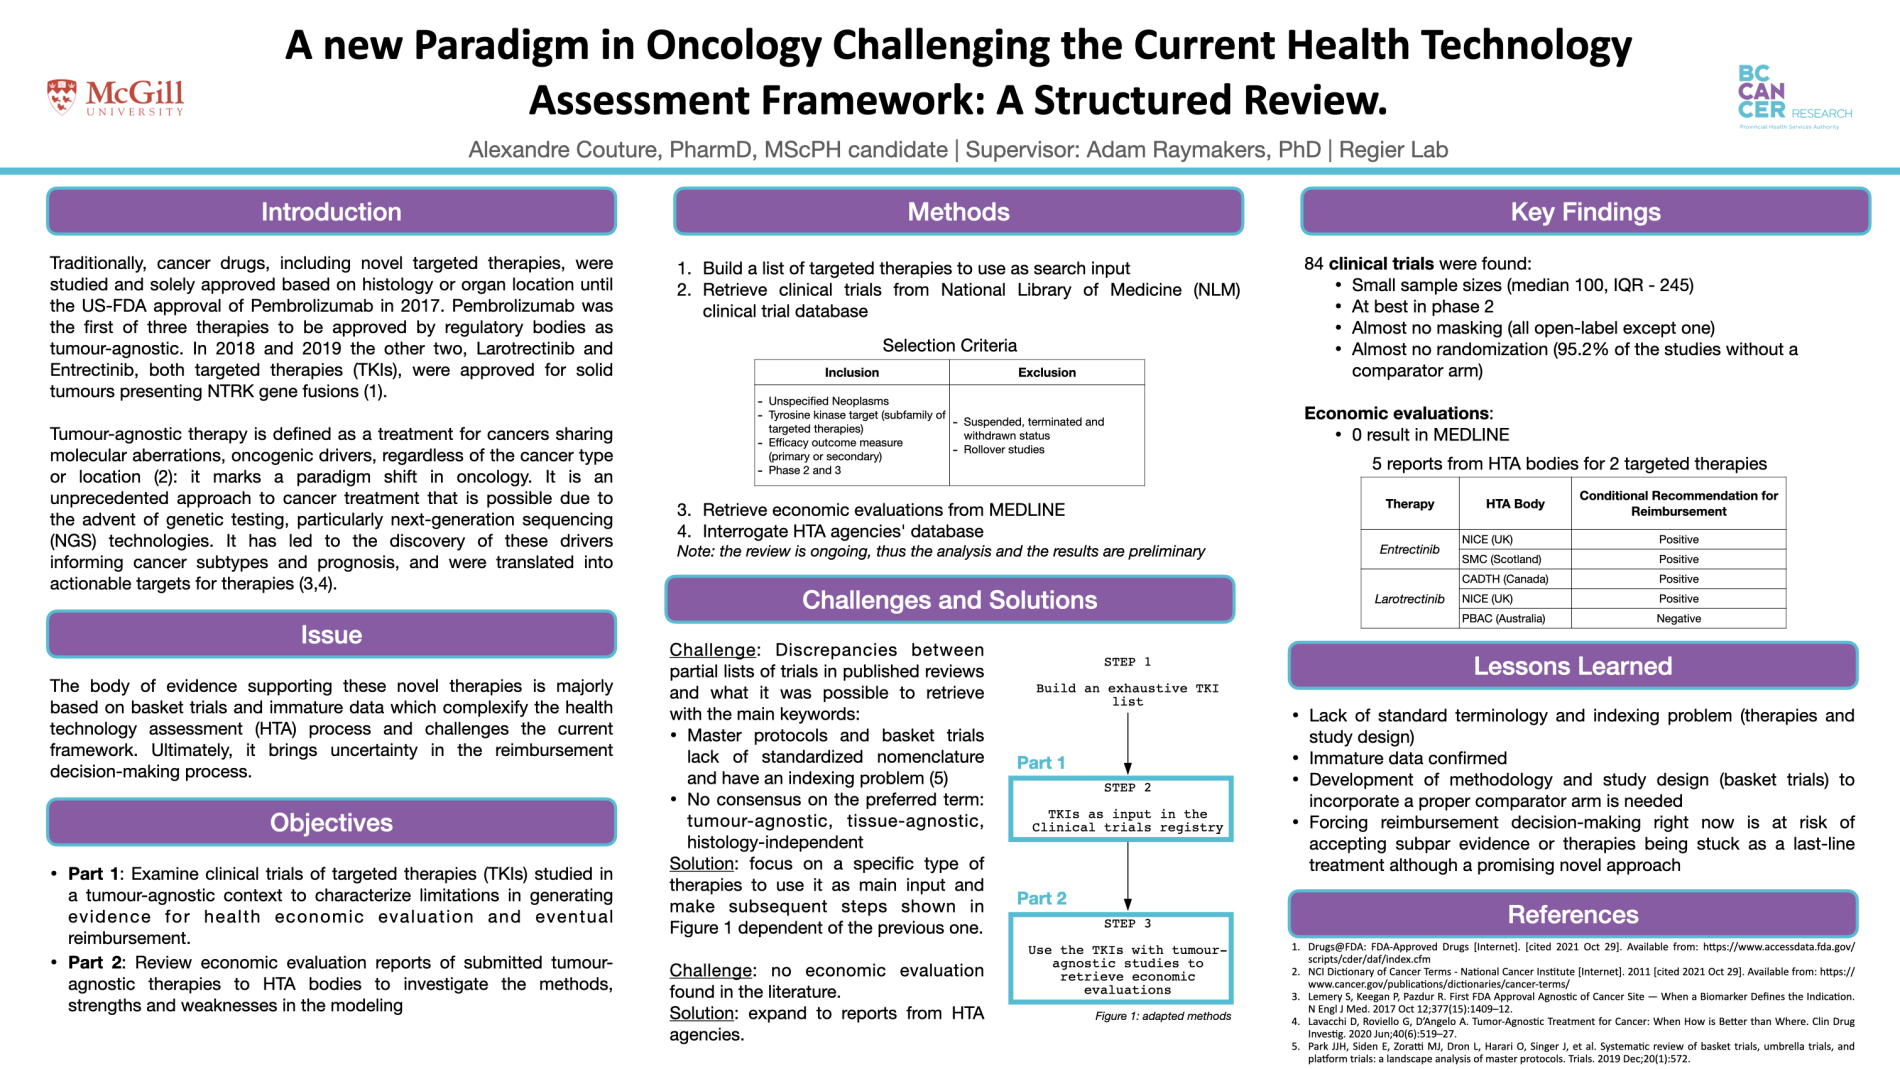 A new Paradigm in Oncology Challenging the Current Health Technology  Assessment Framework: A Structured Review | Epidemiology, Biostatistics and  Occupational Health - McGill University